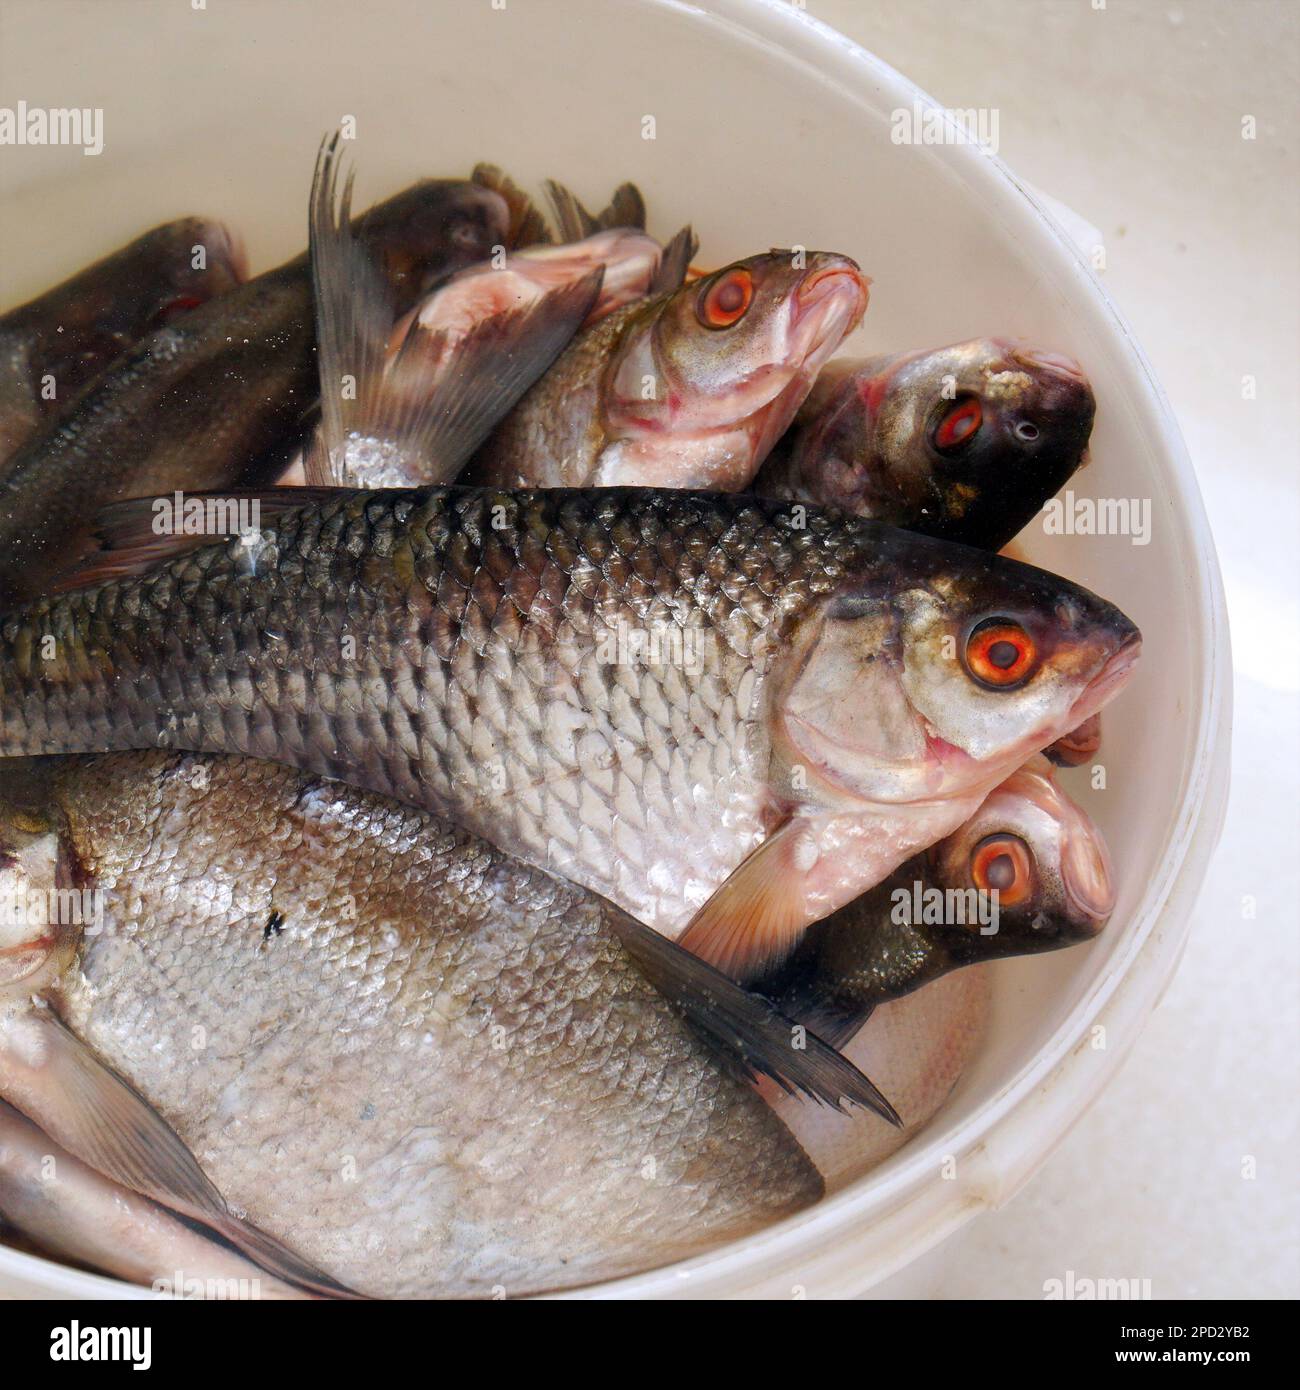 Ice fishermen in Maine share 2 recipes for freshly caught fish